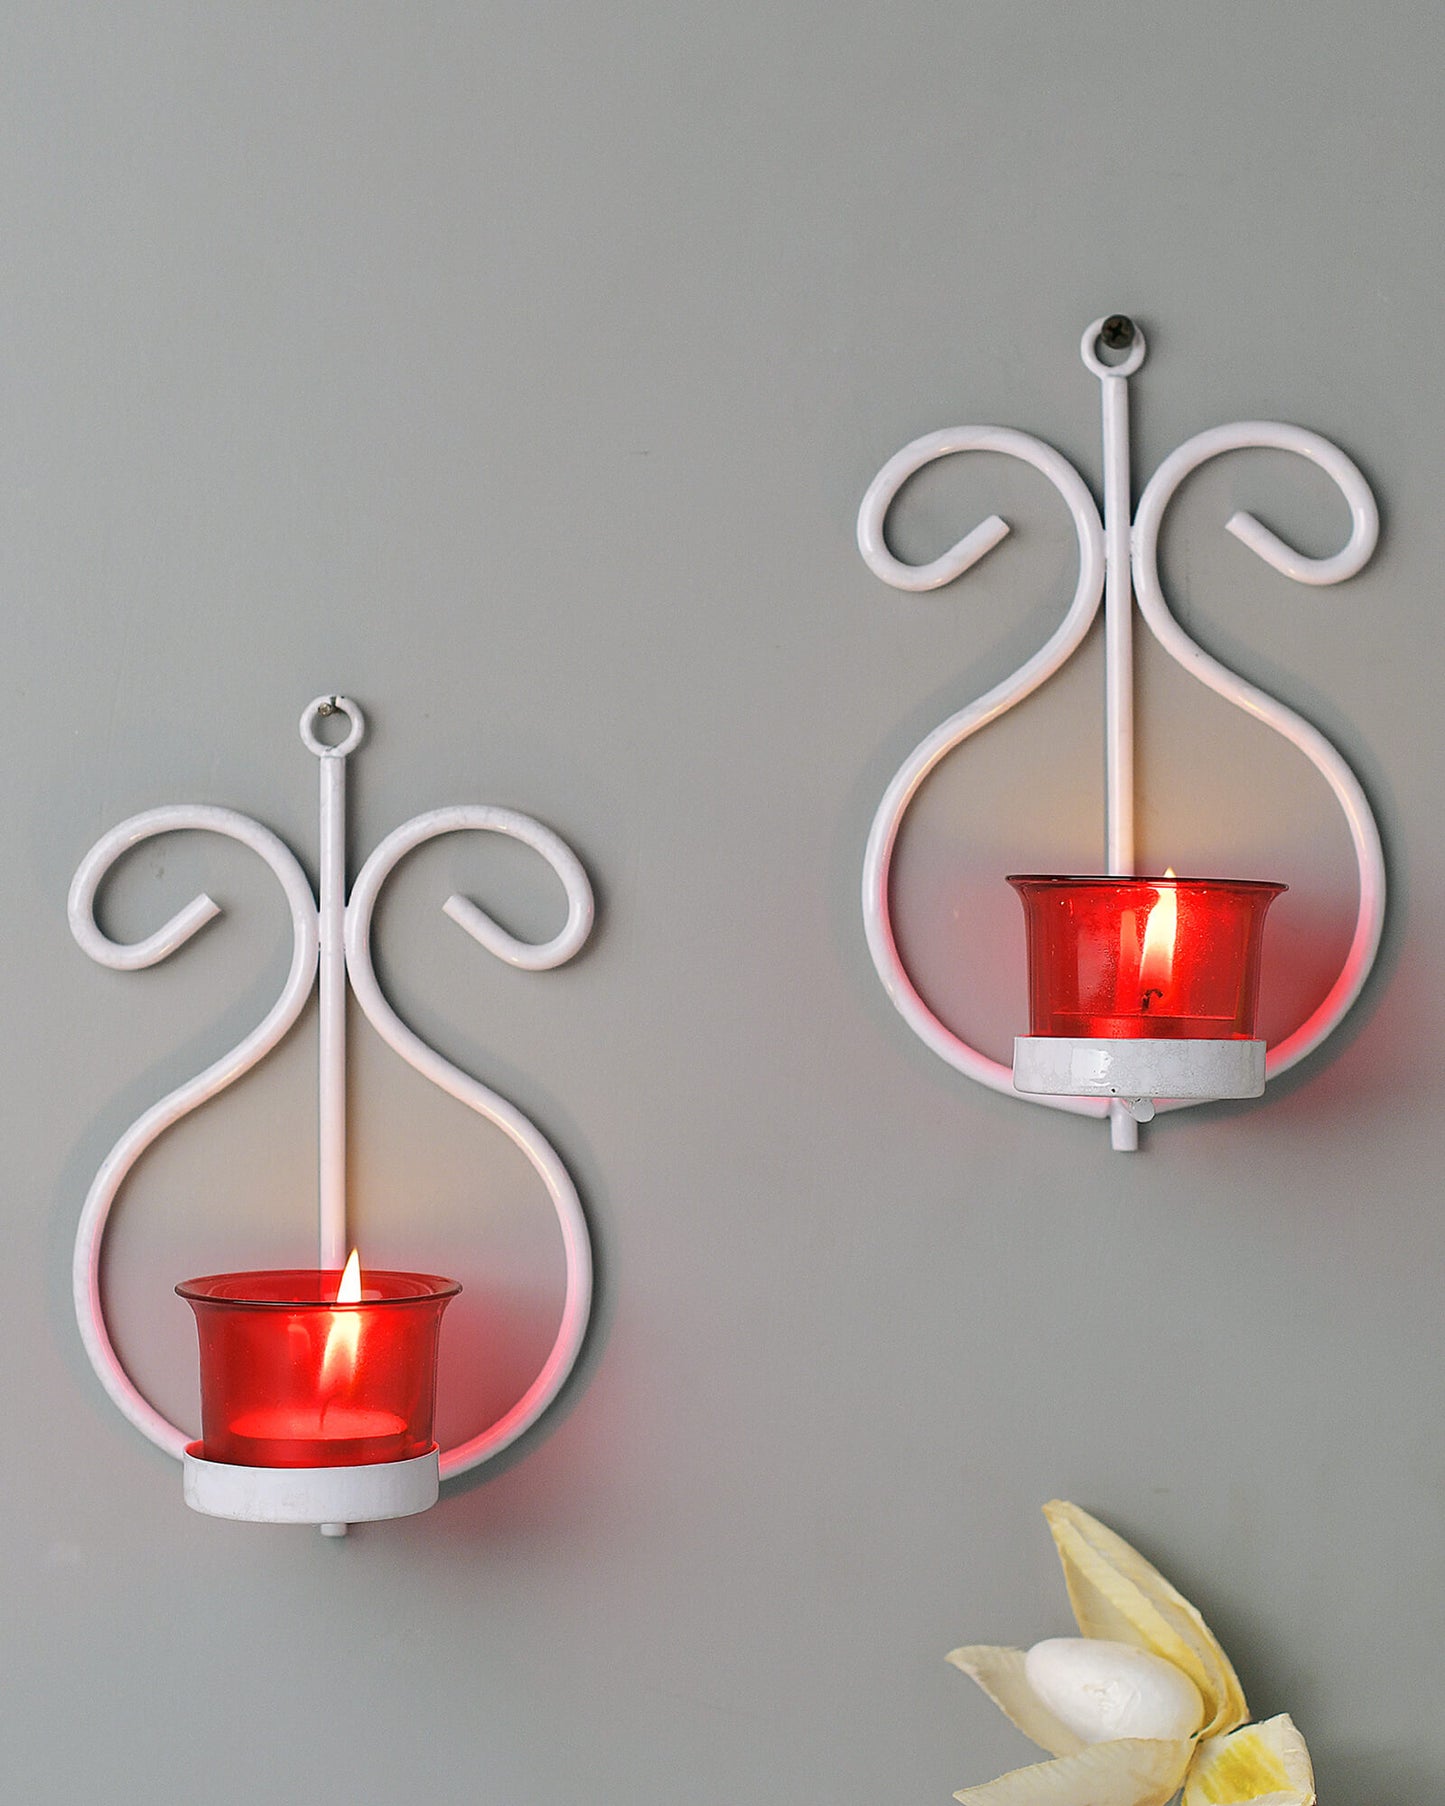 Set of 2 Decorative White Wall Sconce/Candle Holder With Red Glass and Free T-light Candles